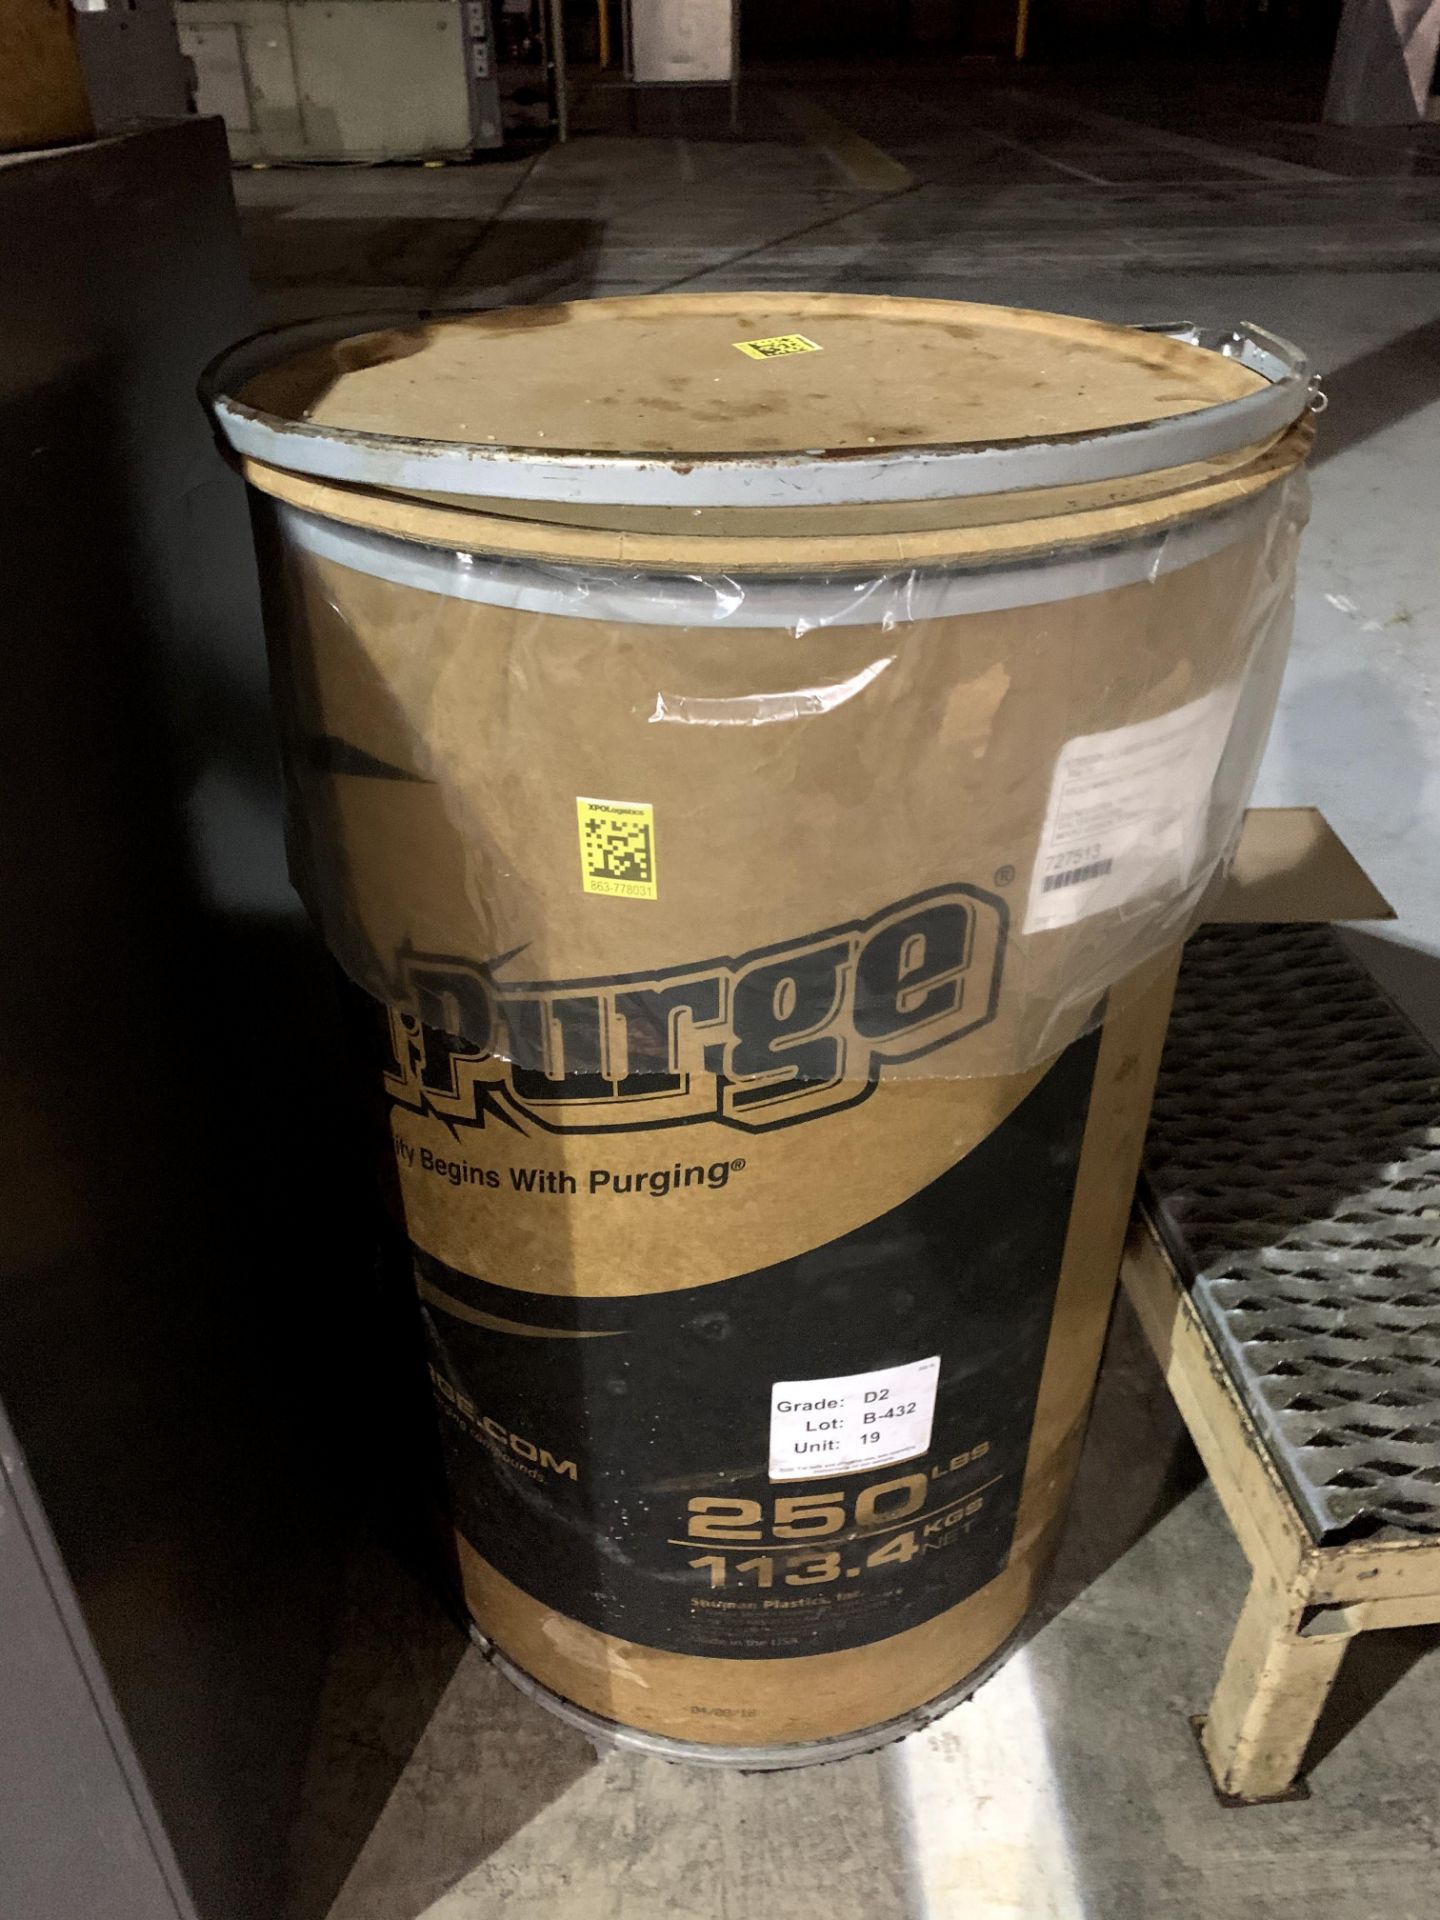 55 Gallon Drum of Dyna Purge Barrel Purging Resin - Image 2 of 2